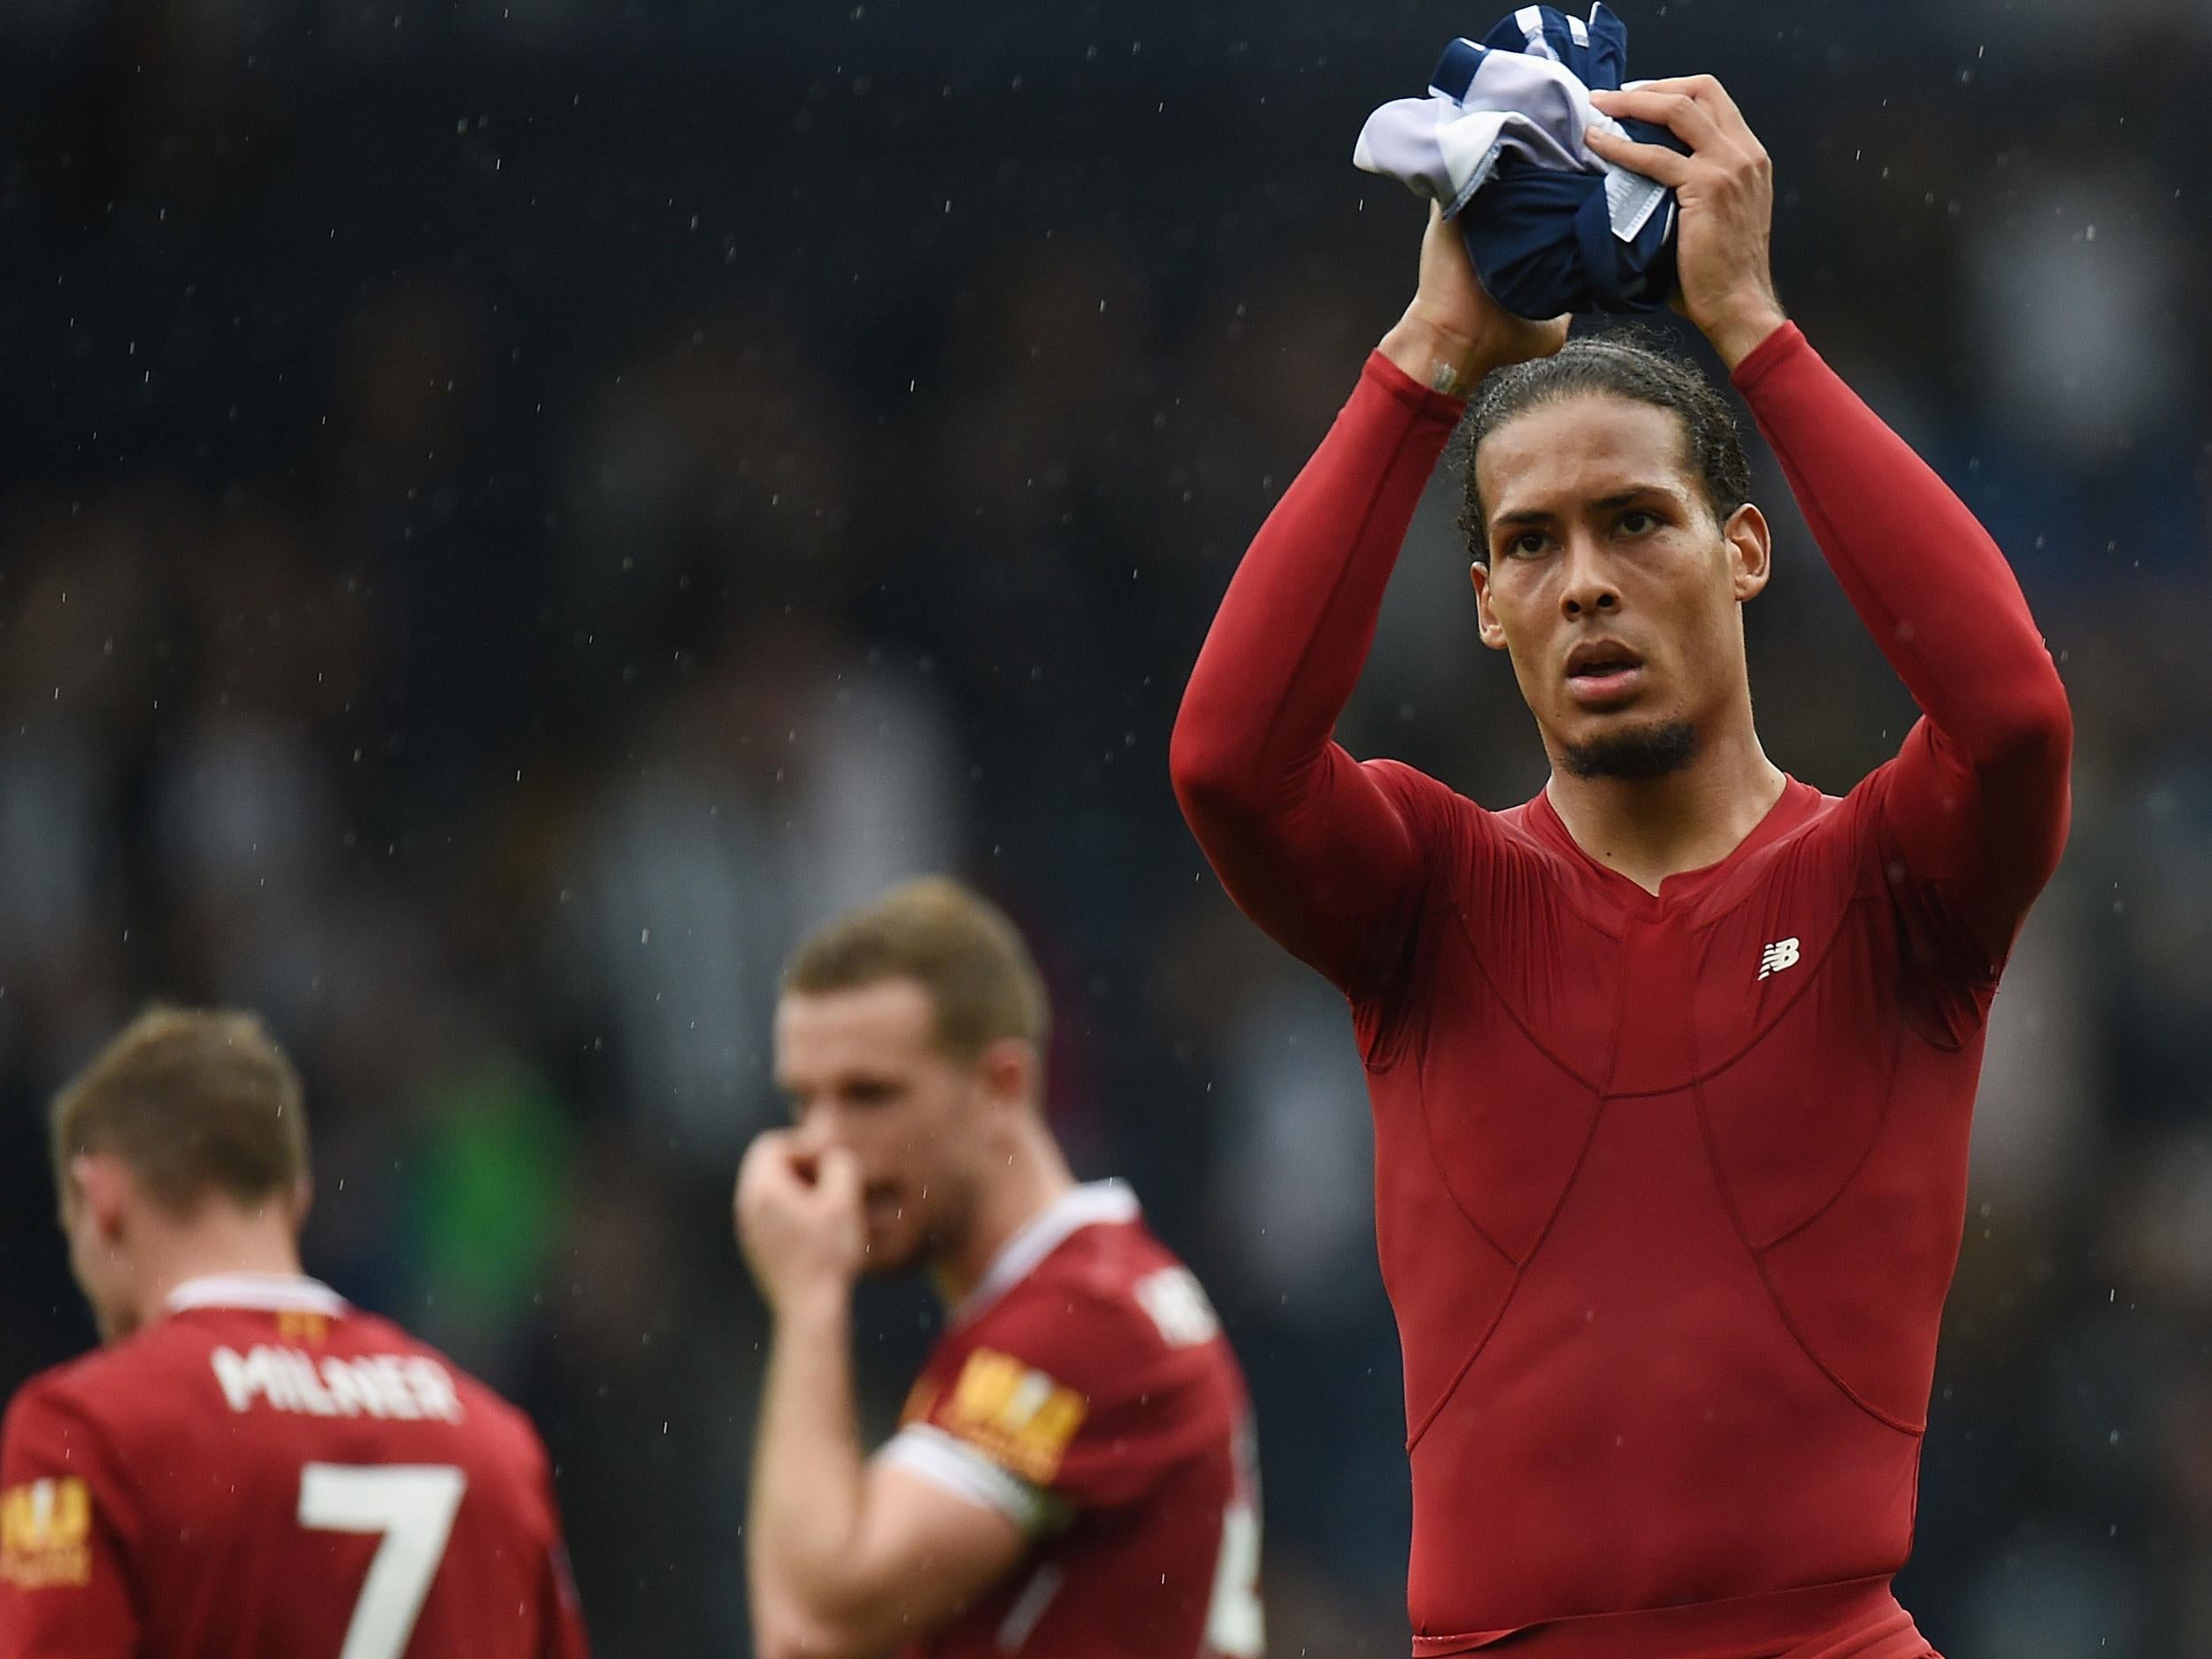 Virgil van Dijk was not happy after Liverpool conceded late at The Hawthorns